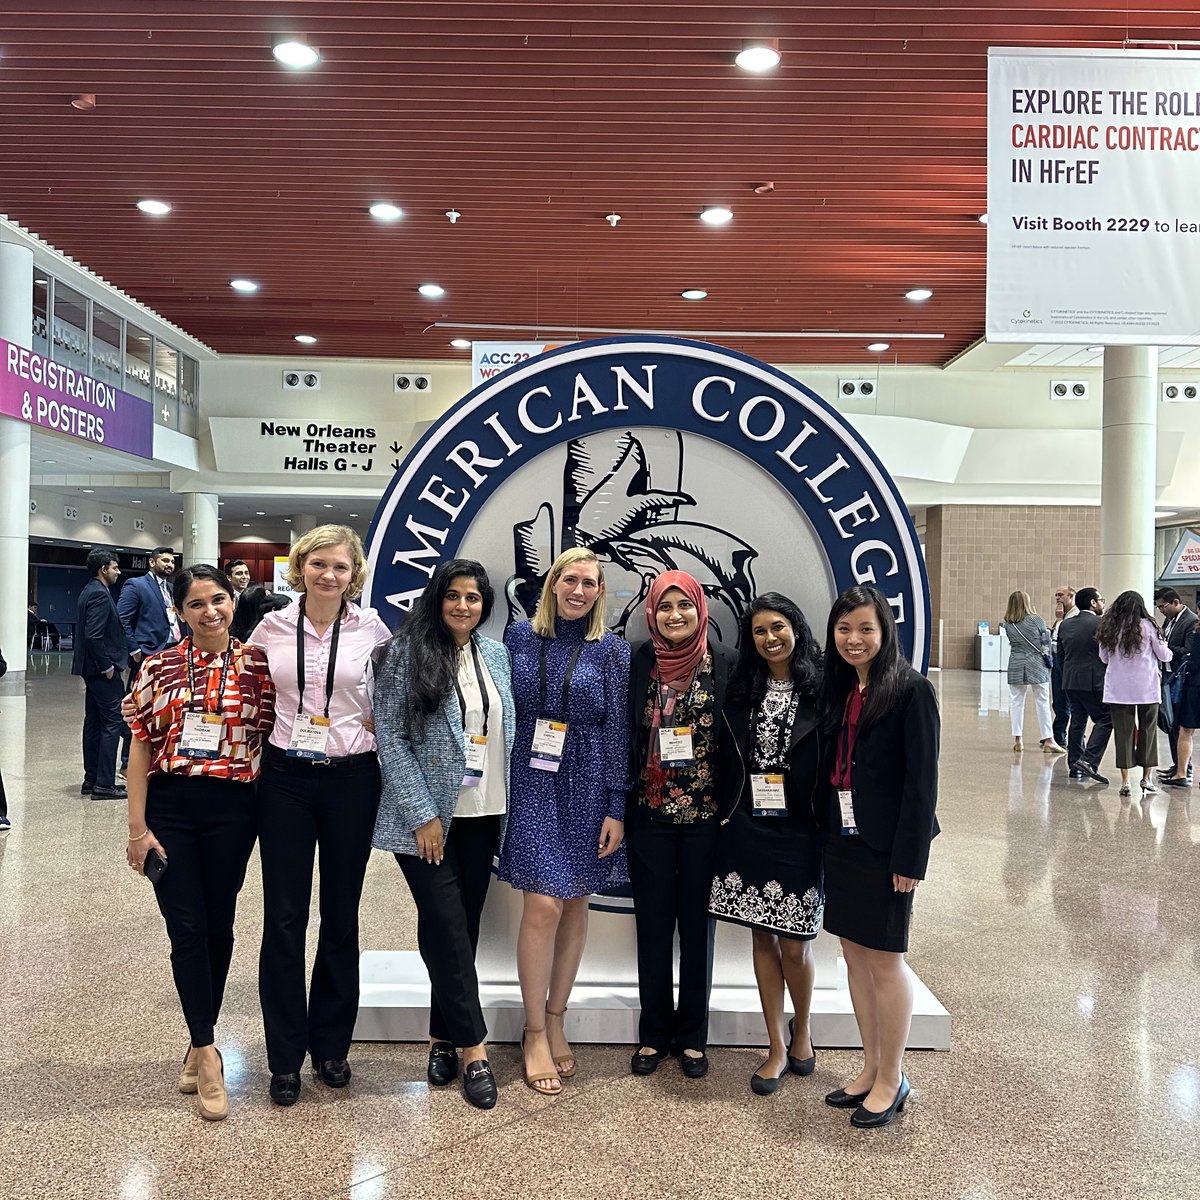 So grateful to learn from so many great minds @ACCinTouch  this past weekend, including all my mentors @amorrismd @PujaKMehtaMD1 and co-fellows @emory_heart! #ACC23